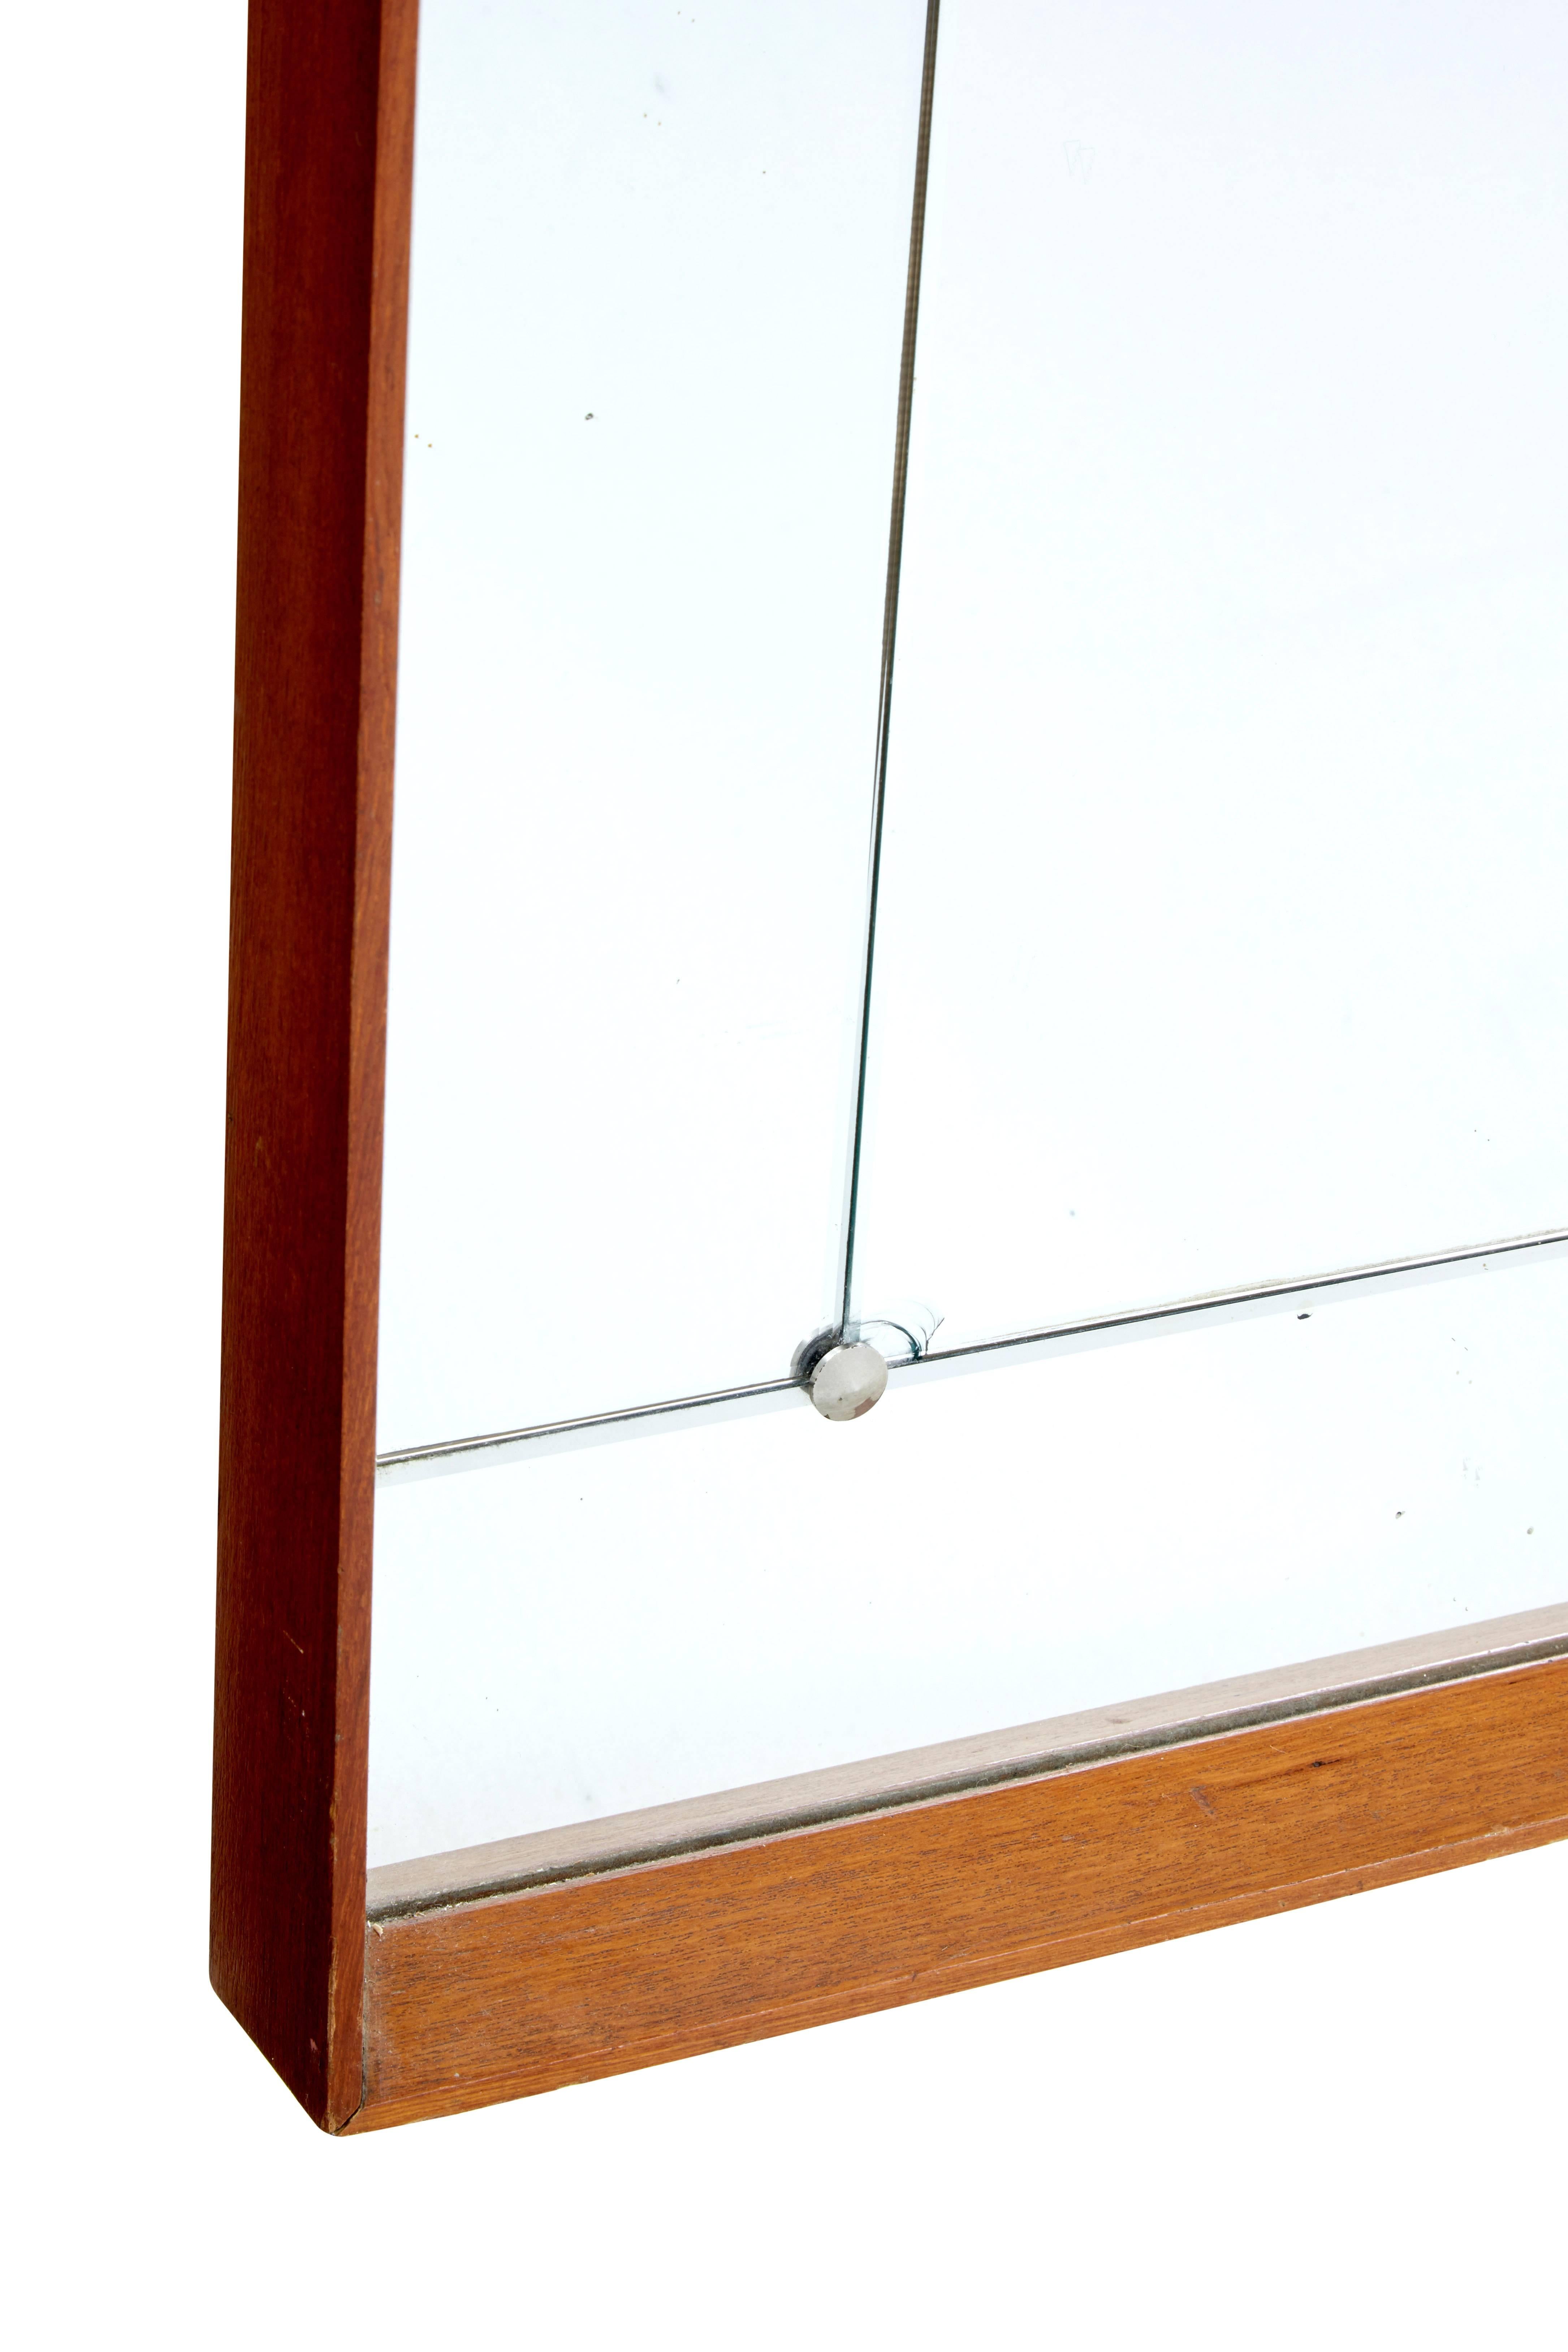 Scandinavian large wall mirror, circa 1950.

Bevelled teak frame, with central mirror surrounded by mirrored panels held in place by screw studs.

One small area of plate loss and one small chip which is photographed.